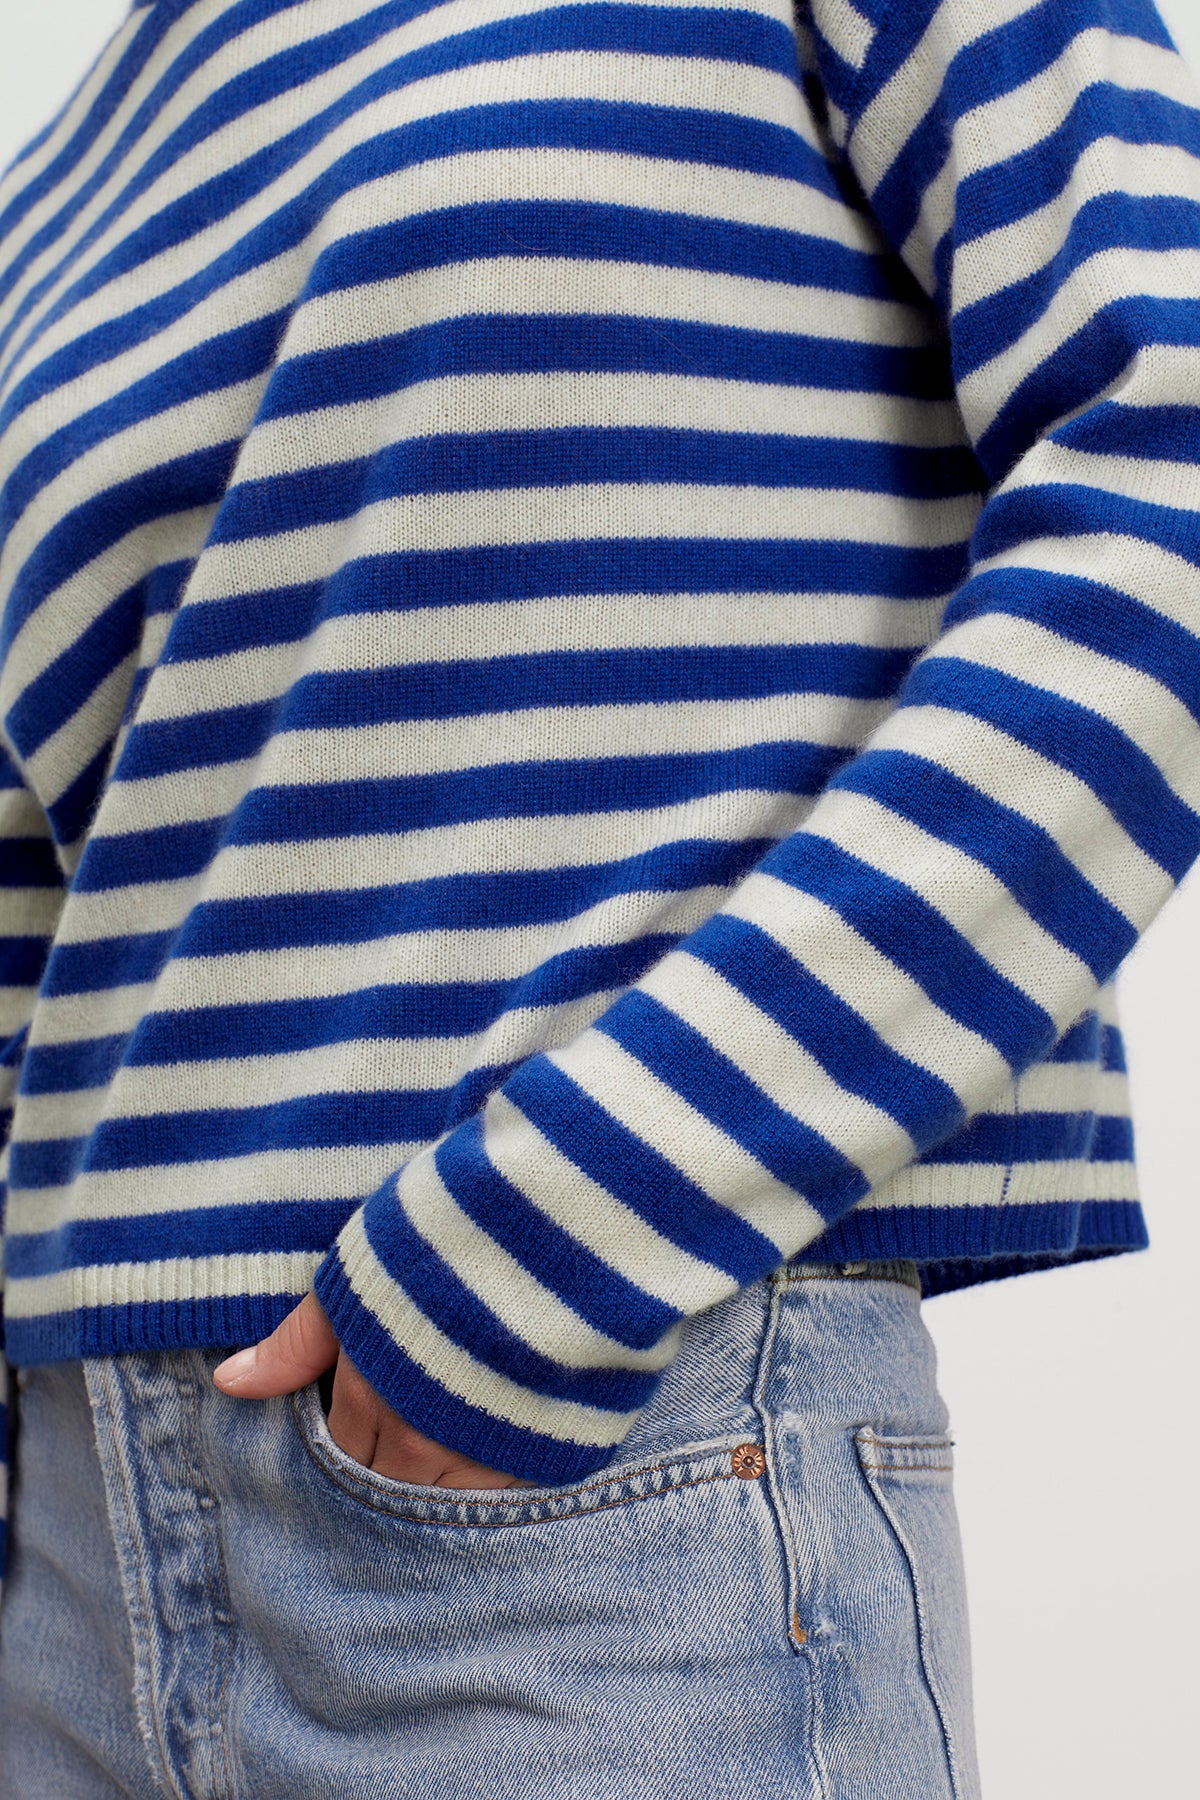   A woman wearing the Velvet by Graham & Spencer ALYSSA CASHMERE STRIPED CREW NECK SWEATER. 